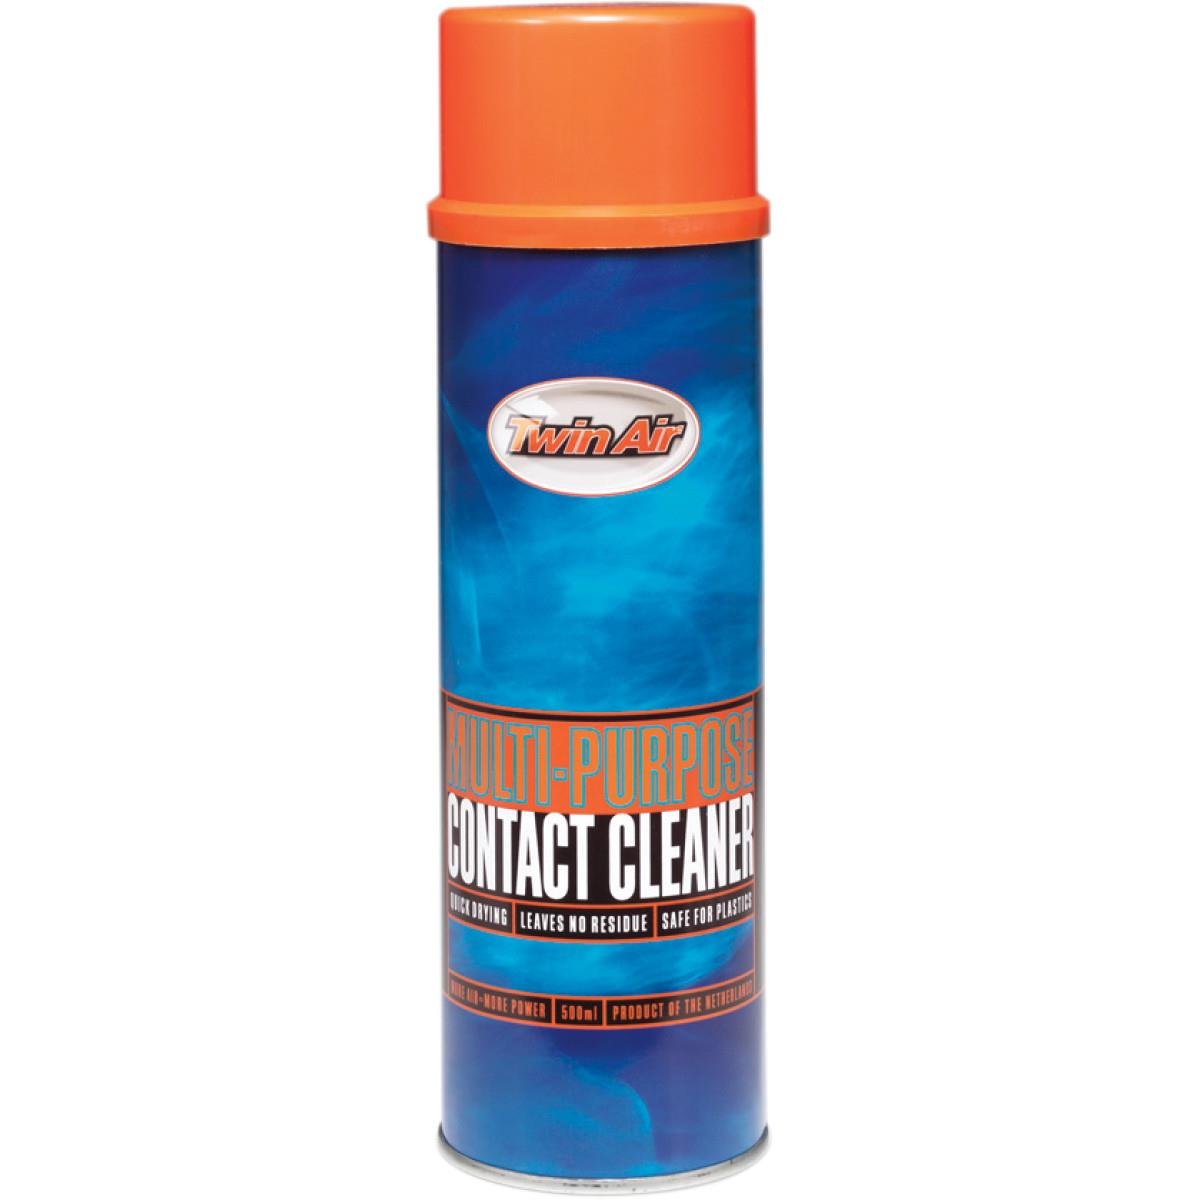 Twin Air Contact cleaner  500 ml